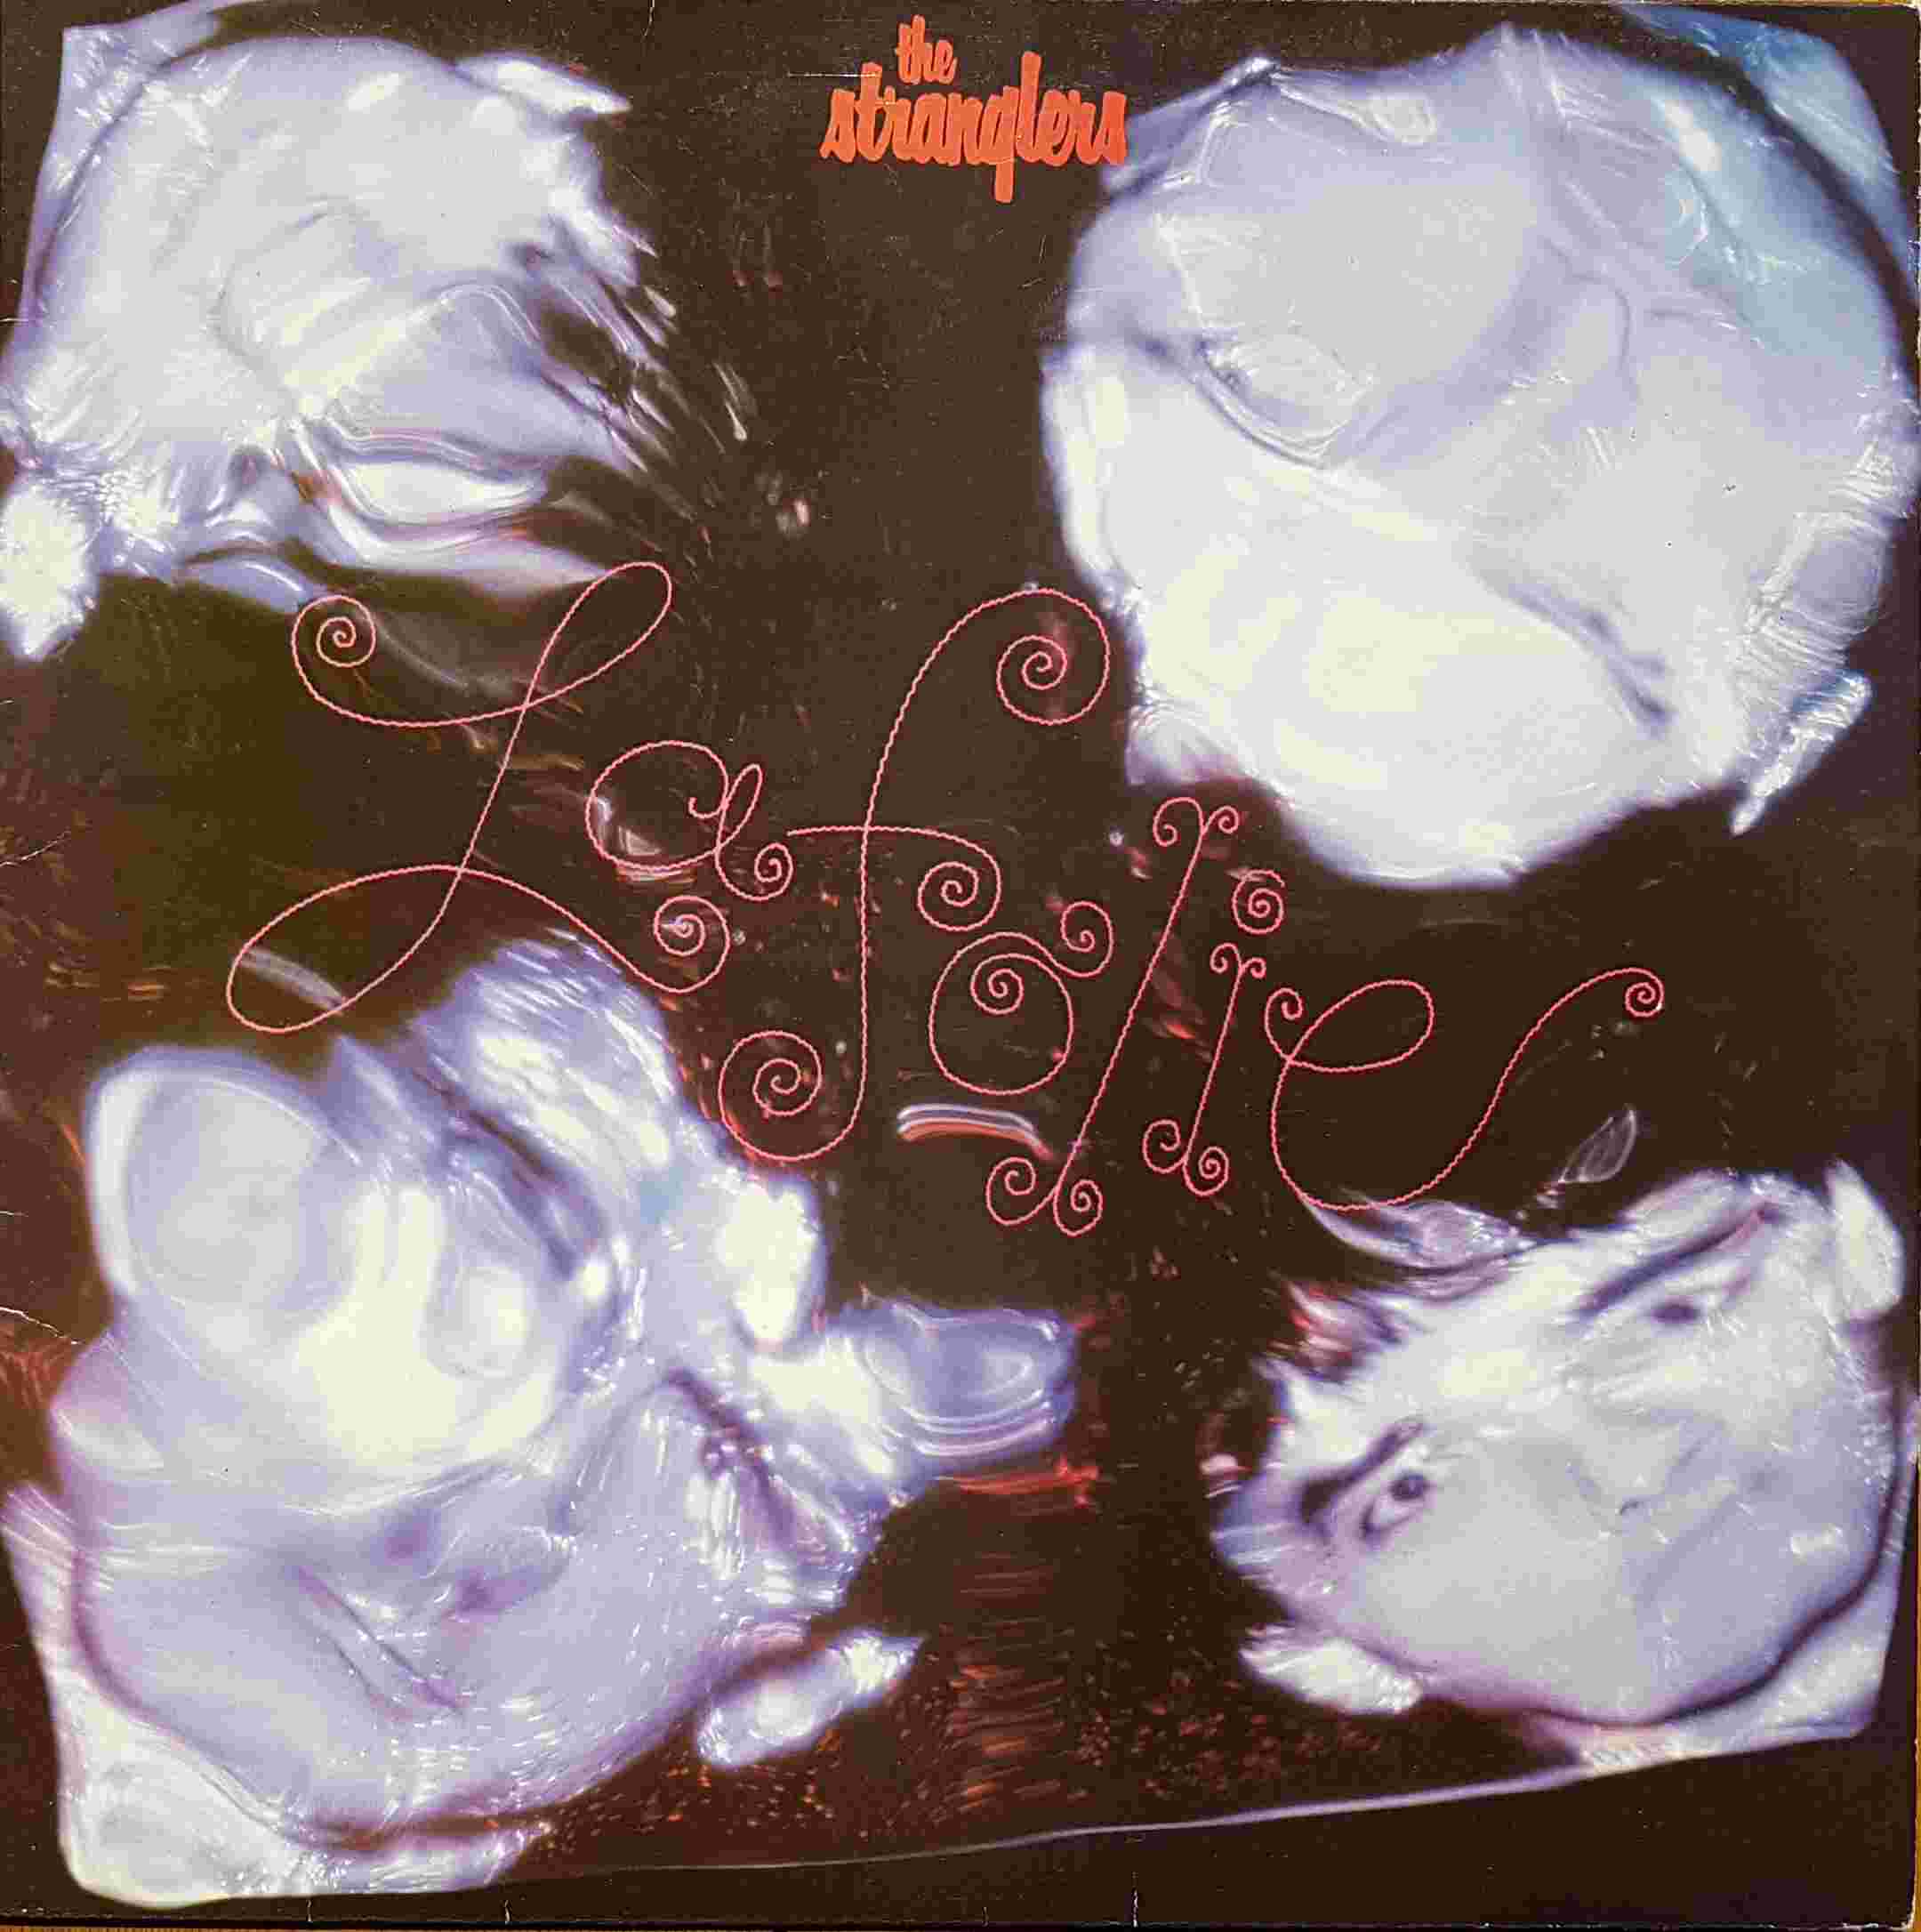 Picture of LBG 30342 La folie by artist The Stranglers  from The Stranglers